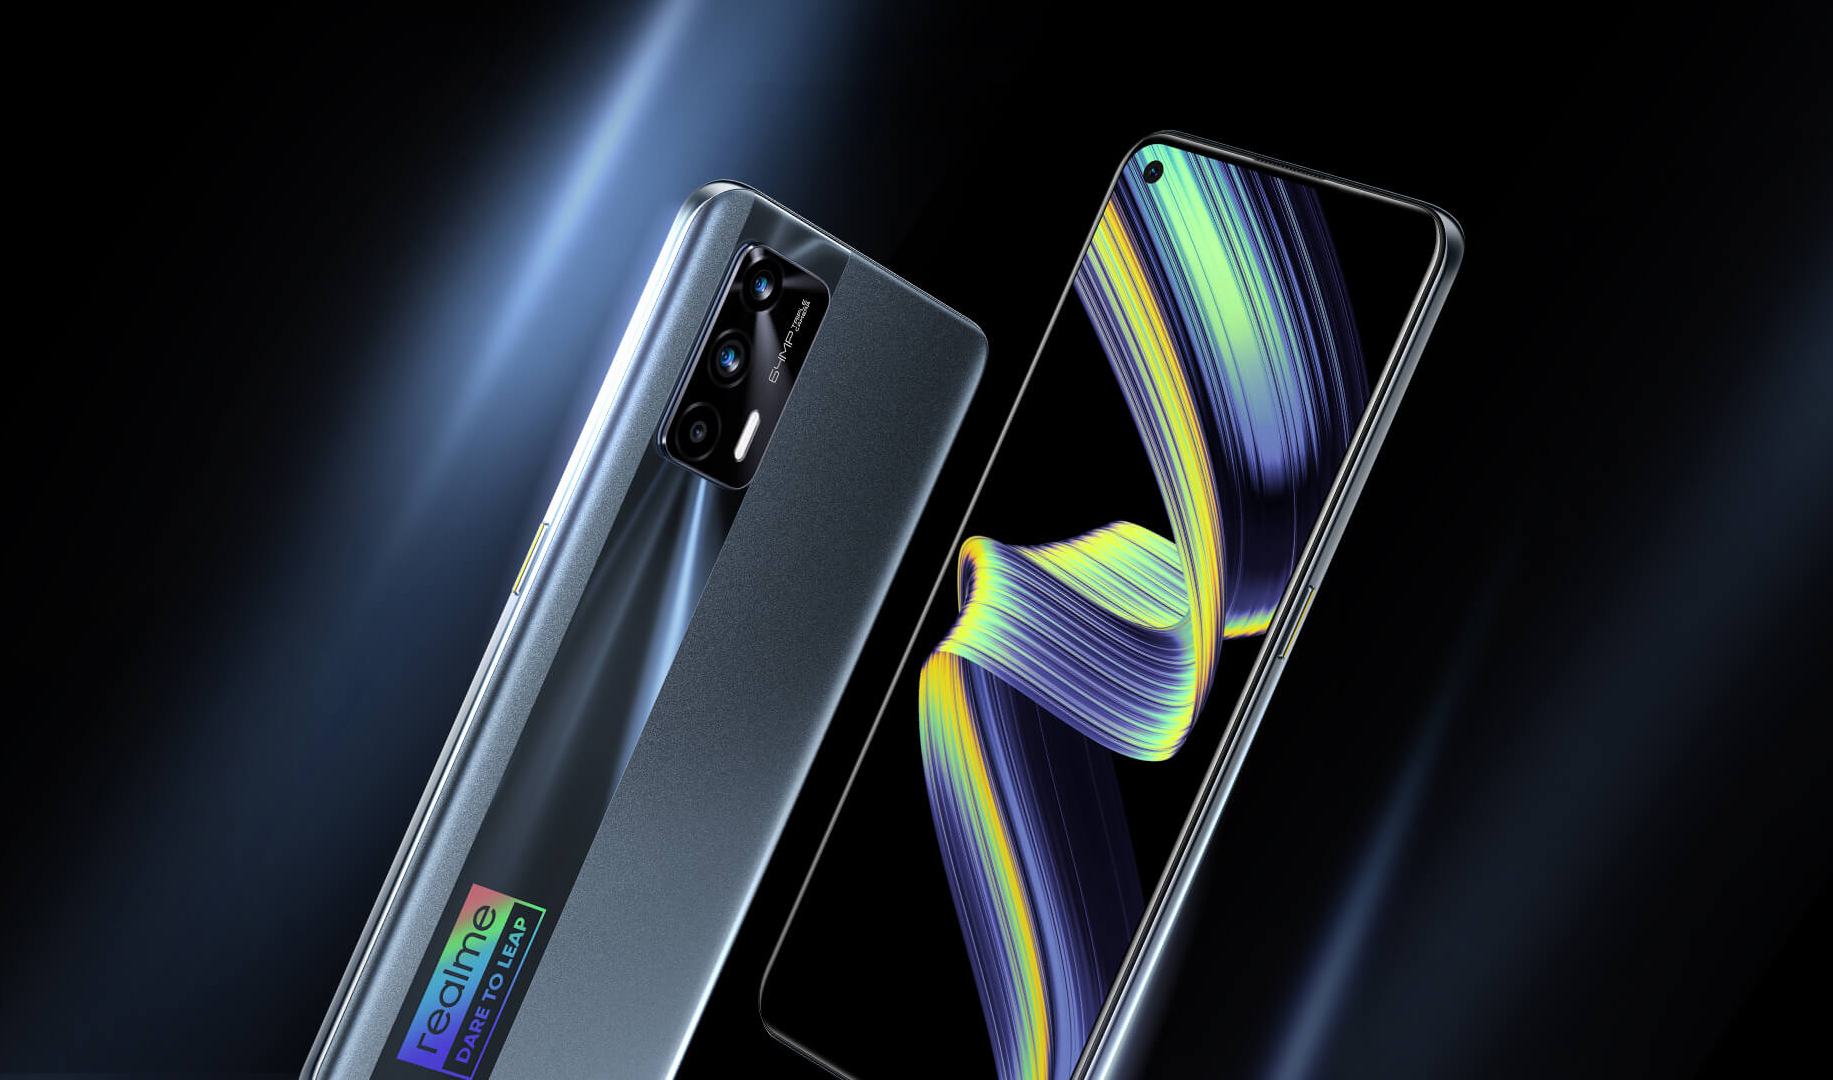 Realme X7 Max 5G: Launch date for Dimensity 1200-packing smartphone with a 120 Hz display announced - NotebookCheck.net News